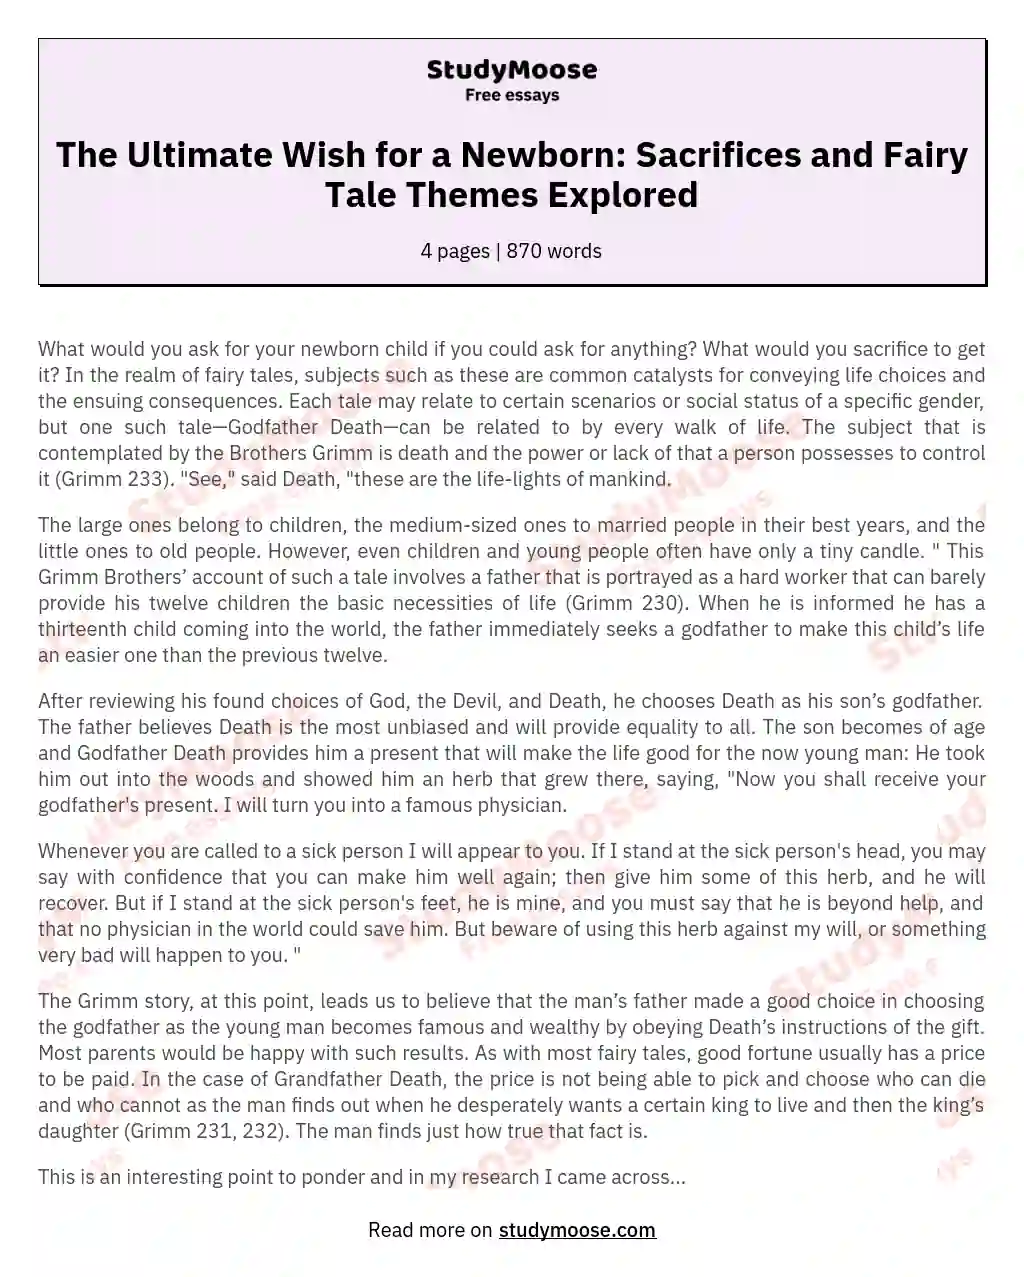 The Ultimate Wish for a Newborn: Sacrifices and Fairy Tale Themes Explored essay